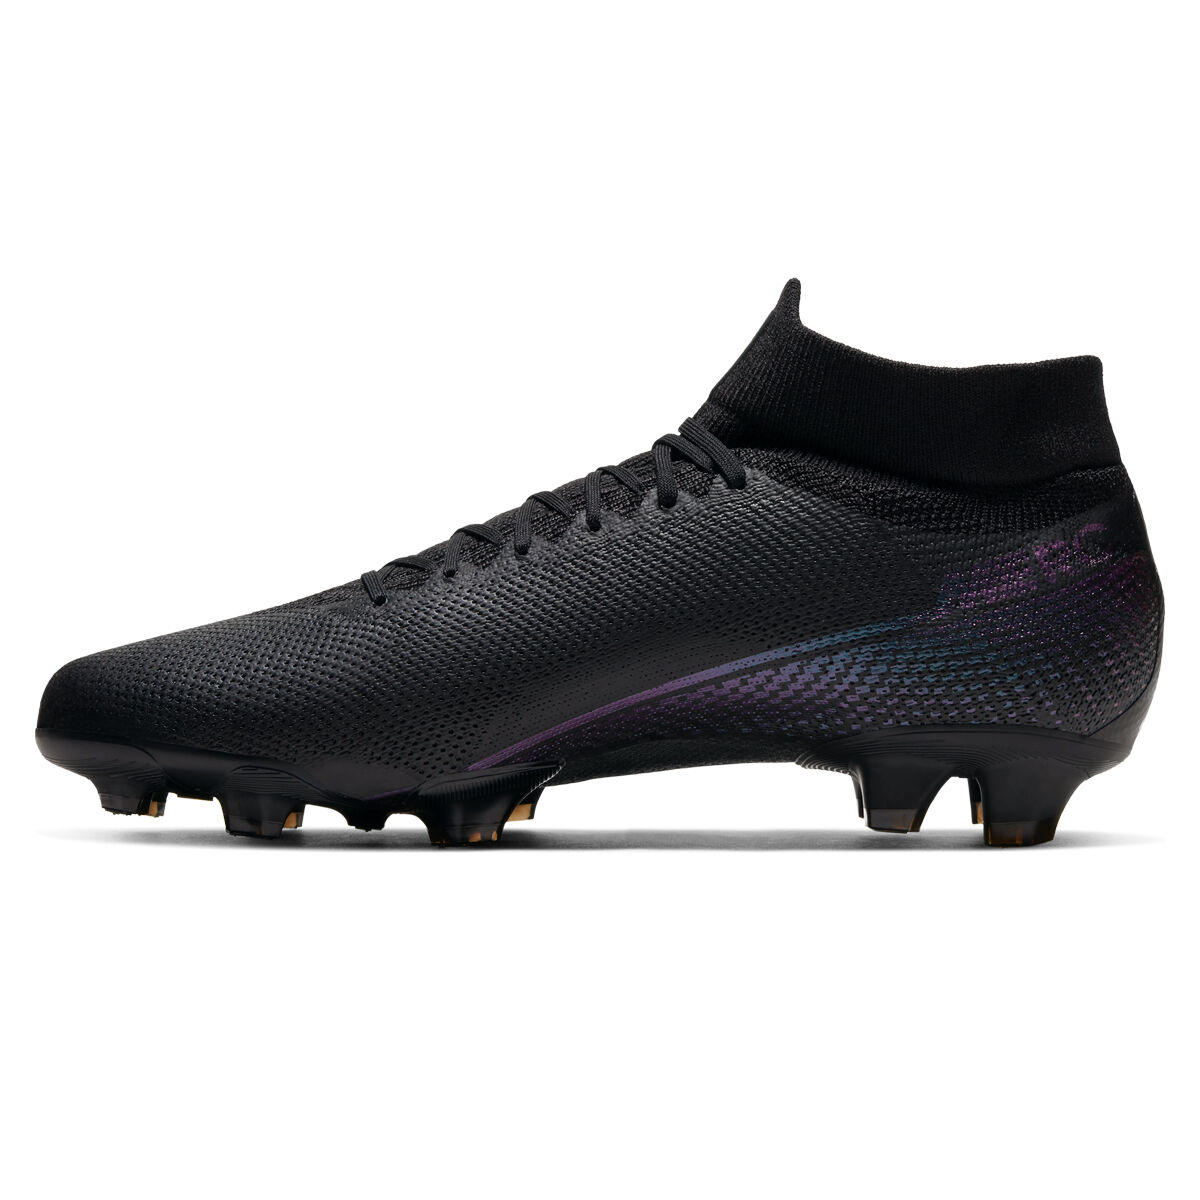 UNBOXING NIKE MERCURIAL SUPERFLY 6 PRO FG FAST.